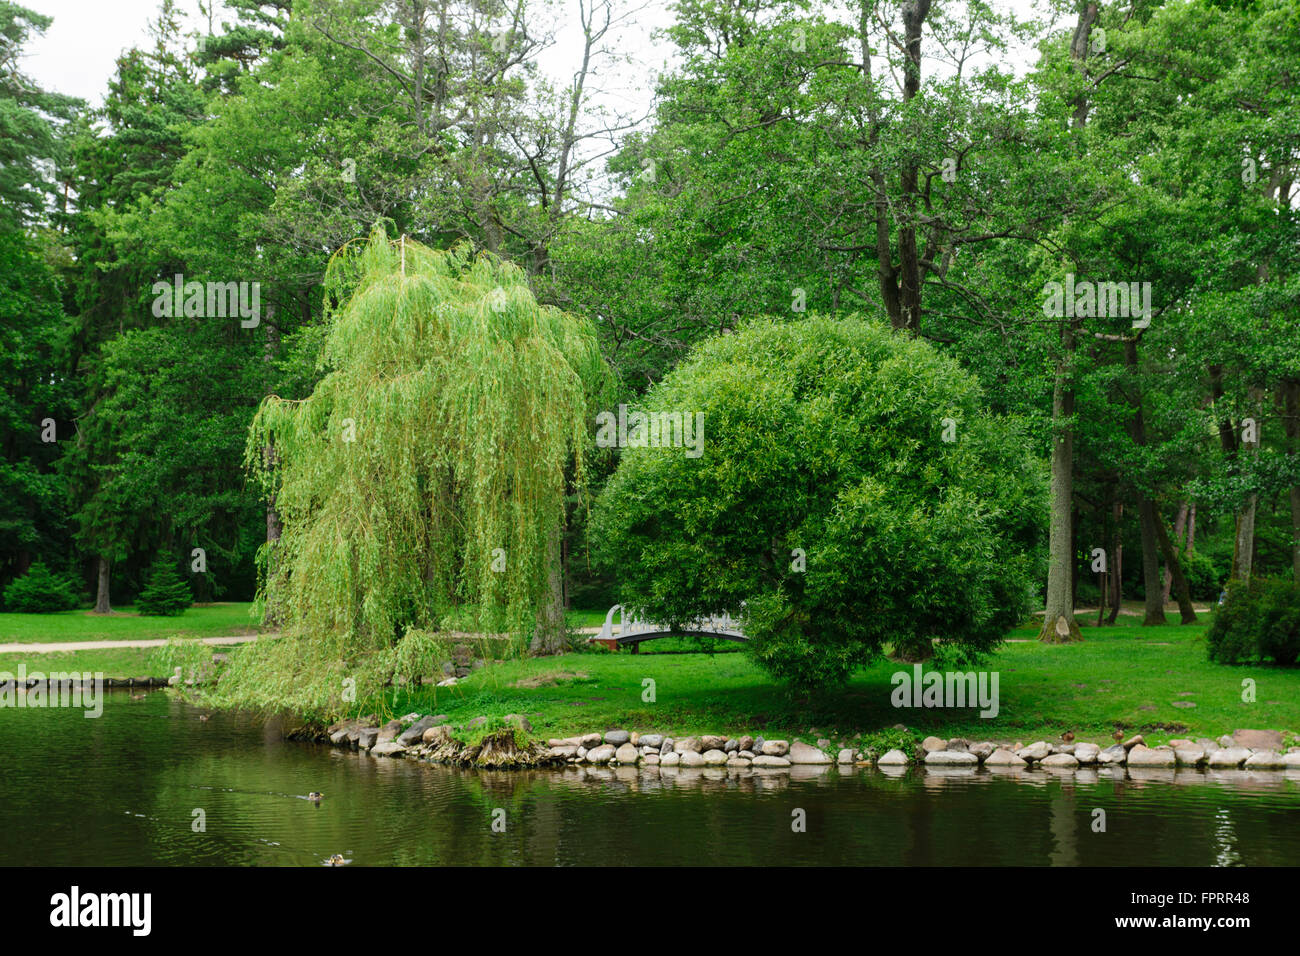 two beautiful trees with magnificent krone in park Stock Photo